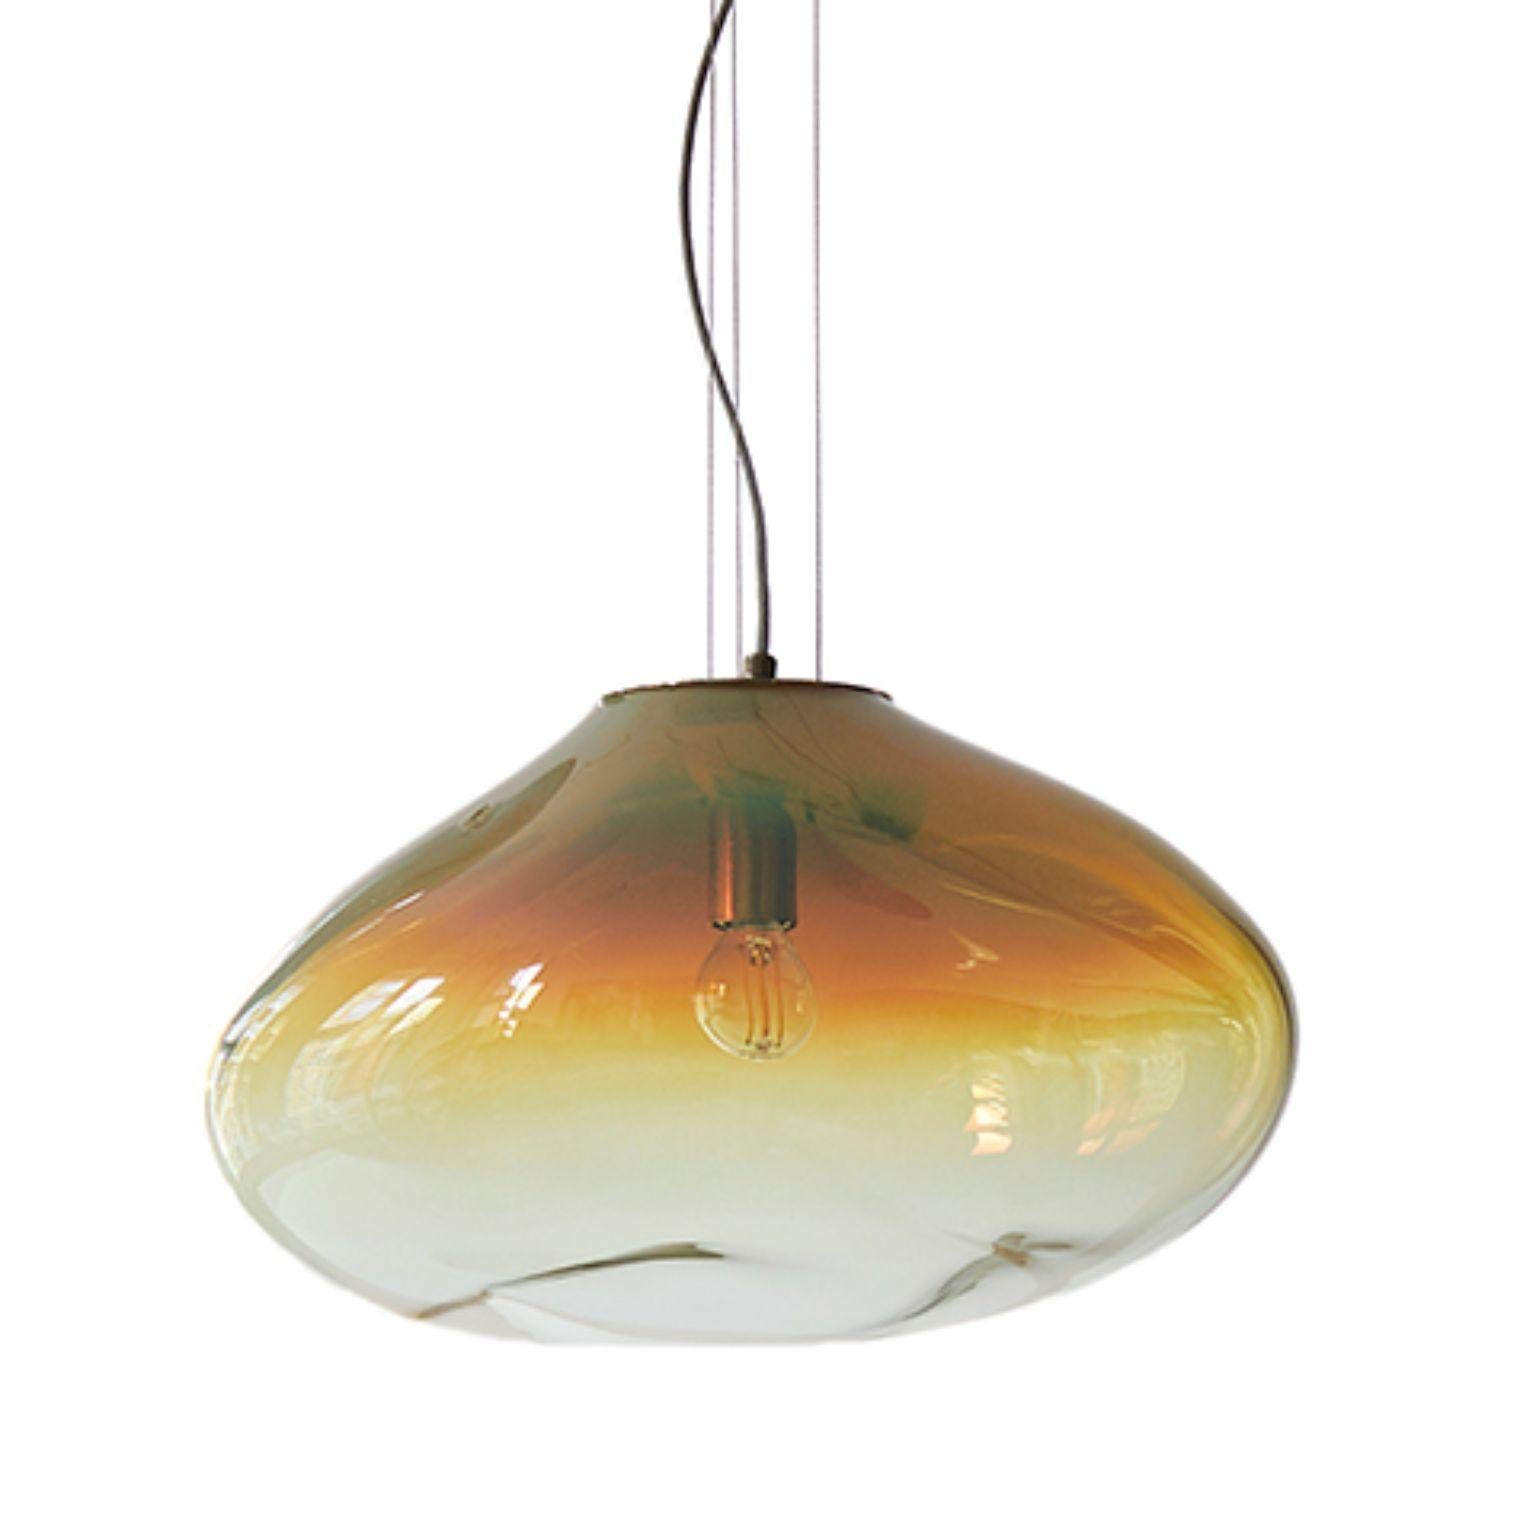 Haumea Amorph amber iridescent L pendant by Eloa.
No UL listed 
Material: glass, steel, silver, LED bulb
Dimensions: D27 x W39 x H30 cm
Also available in different colours and dimensions.

All our lamps can be wired according to each country. If